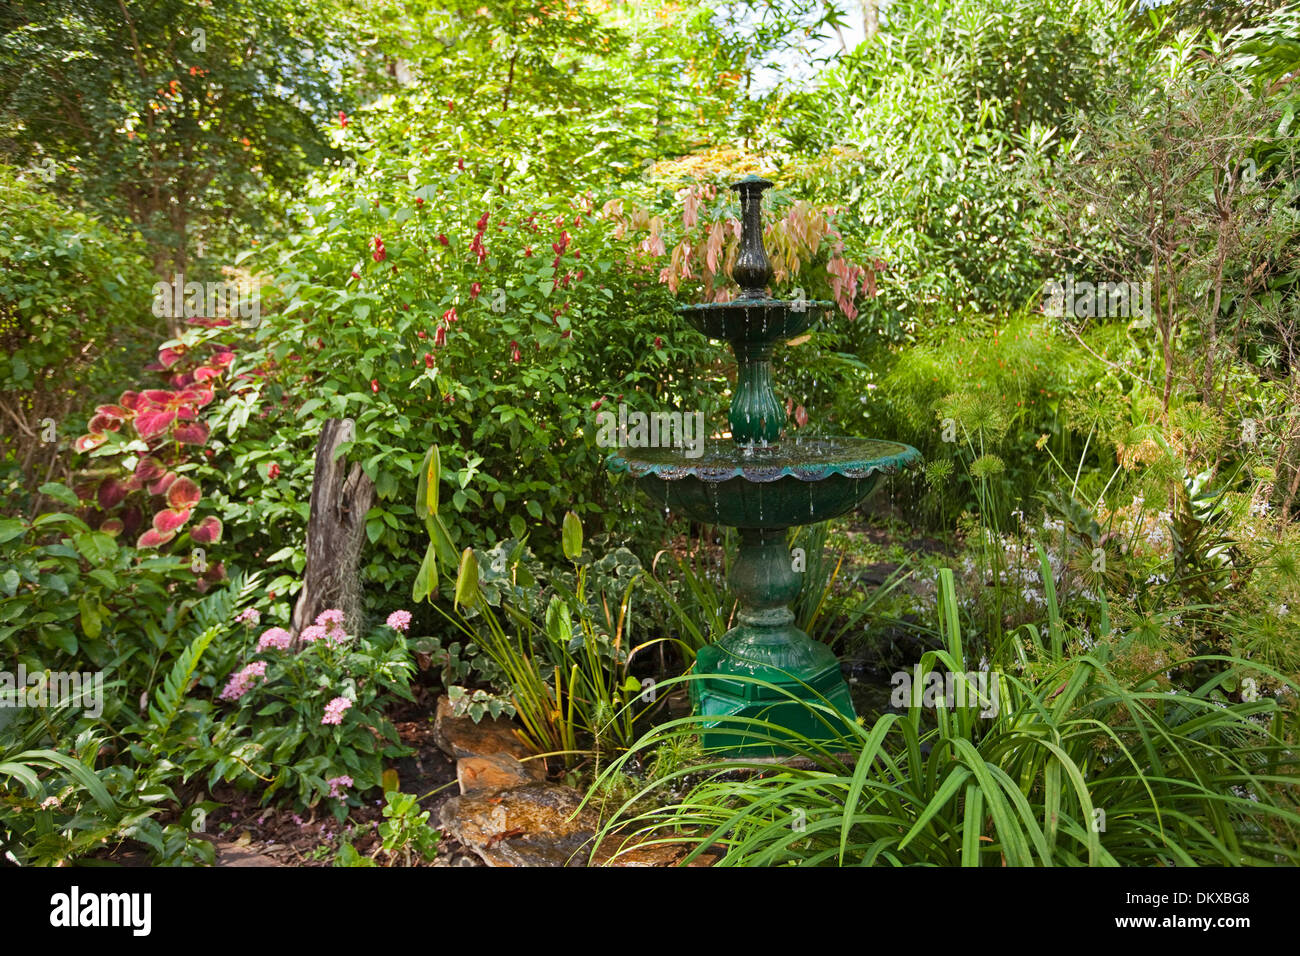 Spectacular lush sub-tropical garden with decorative fountain water feature, emerald foliage, flowering shrubs and perennials Stock Photo